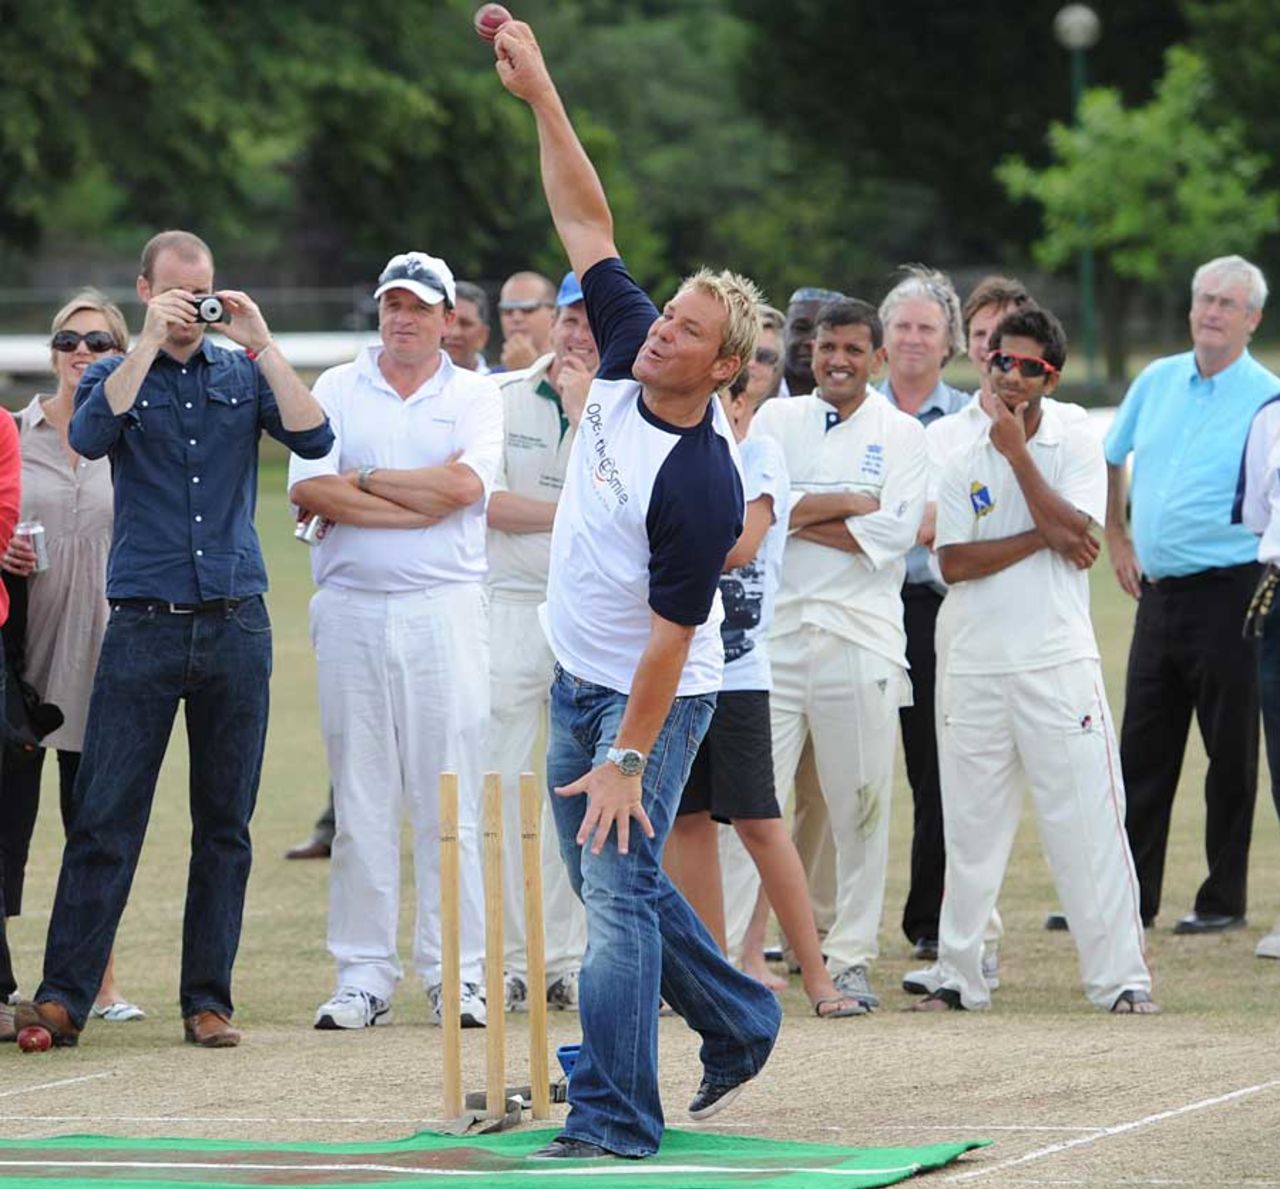 Shane Warne turns his arm over at an event in London, July 2, 2010